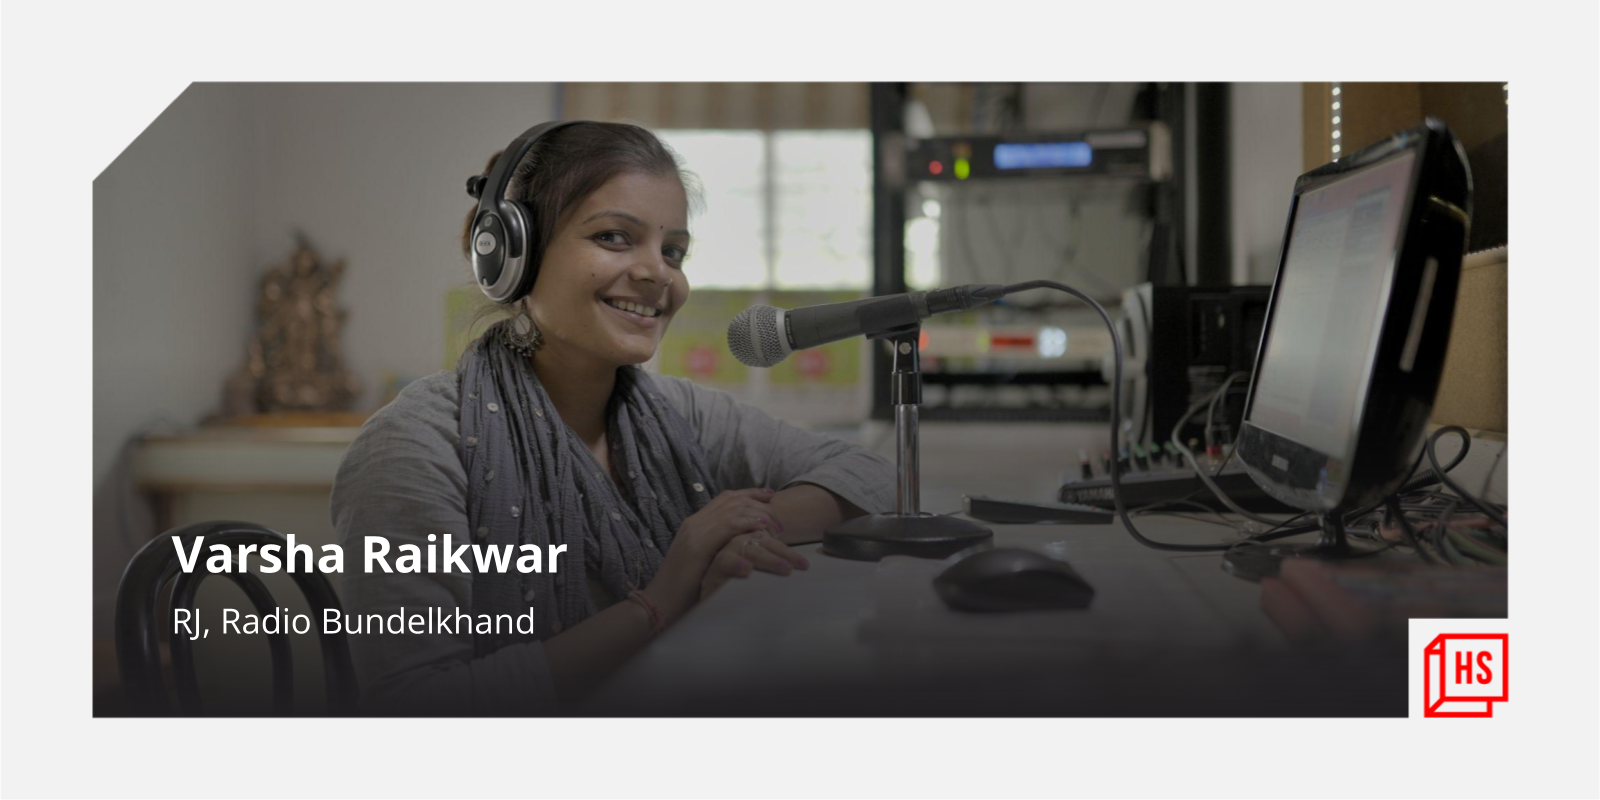 This RJ from a community radio in Bundelkhand is spreading awareness on climate change

